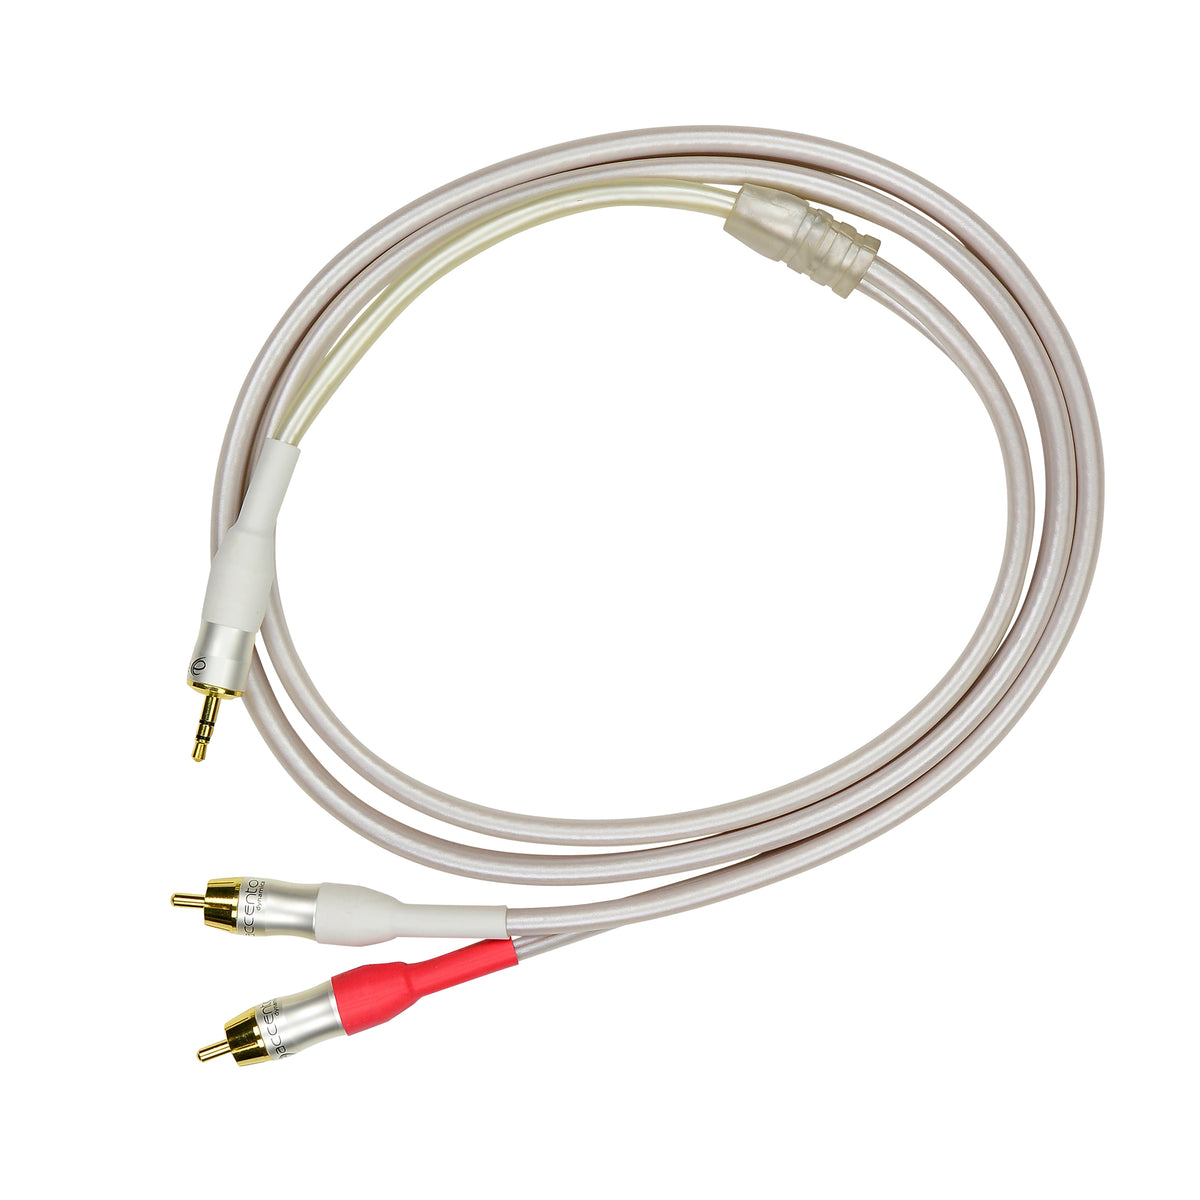 Stereo 3.5mm to 2 X RCA Cable